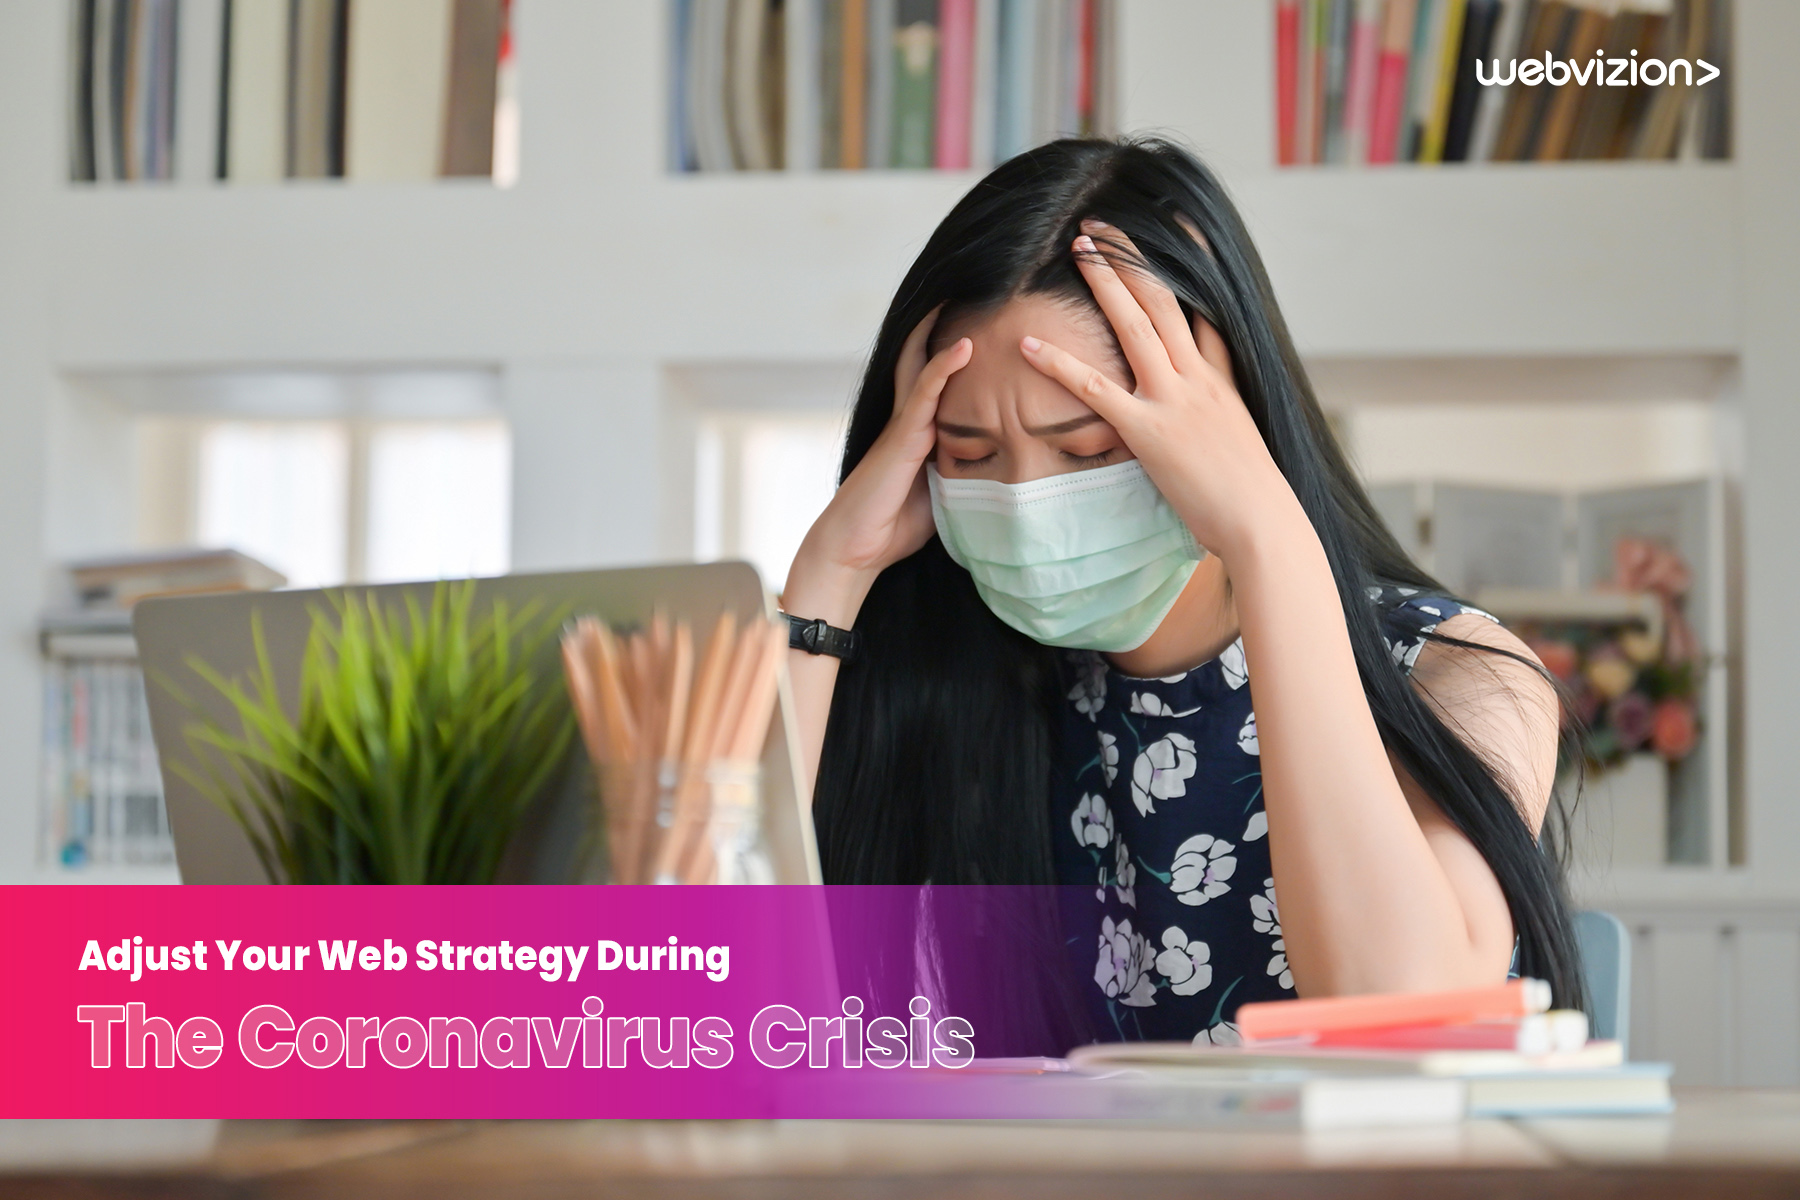 Smart Ways To Adjust Your Web Strategy During The Coronavirus Crisis